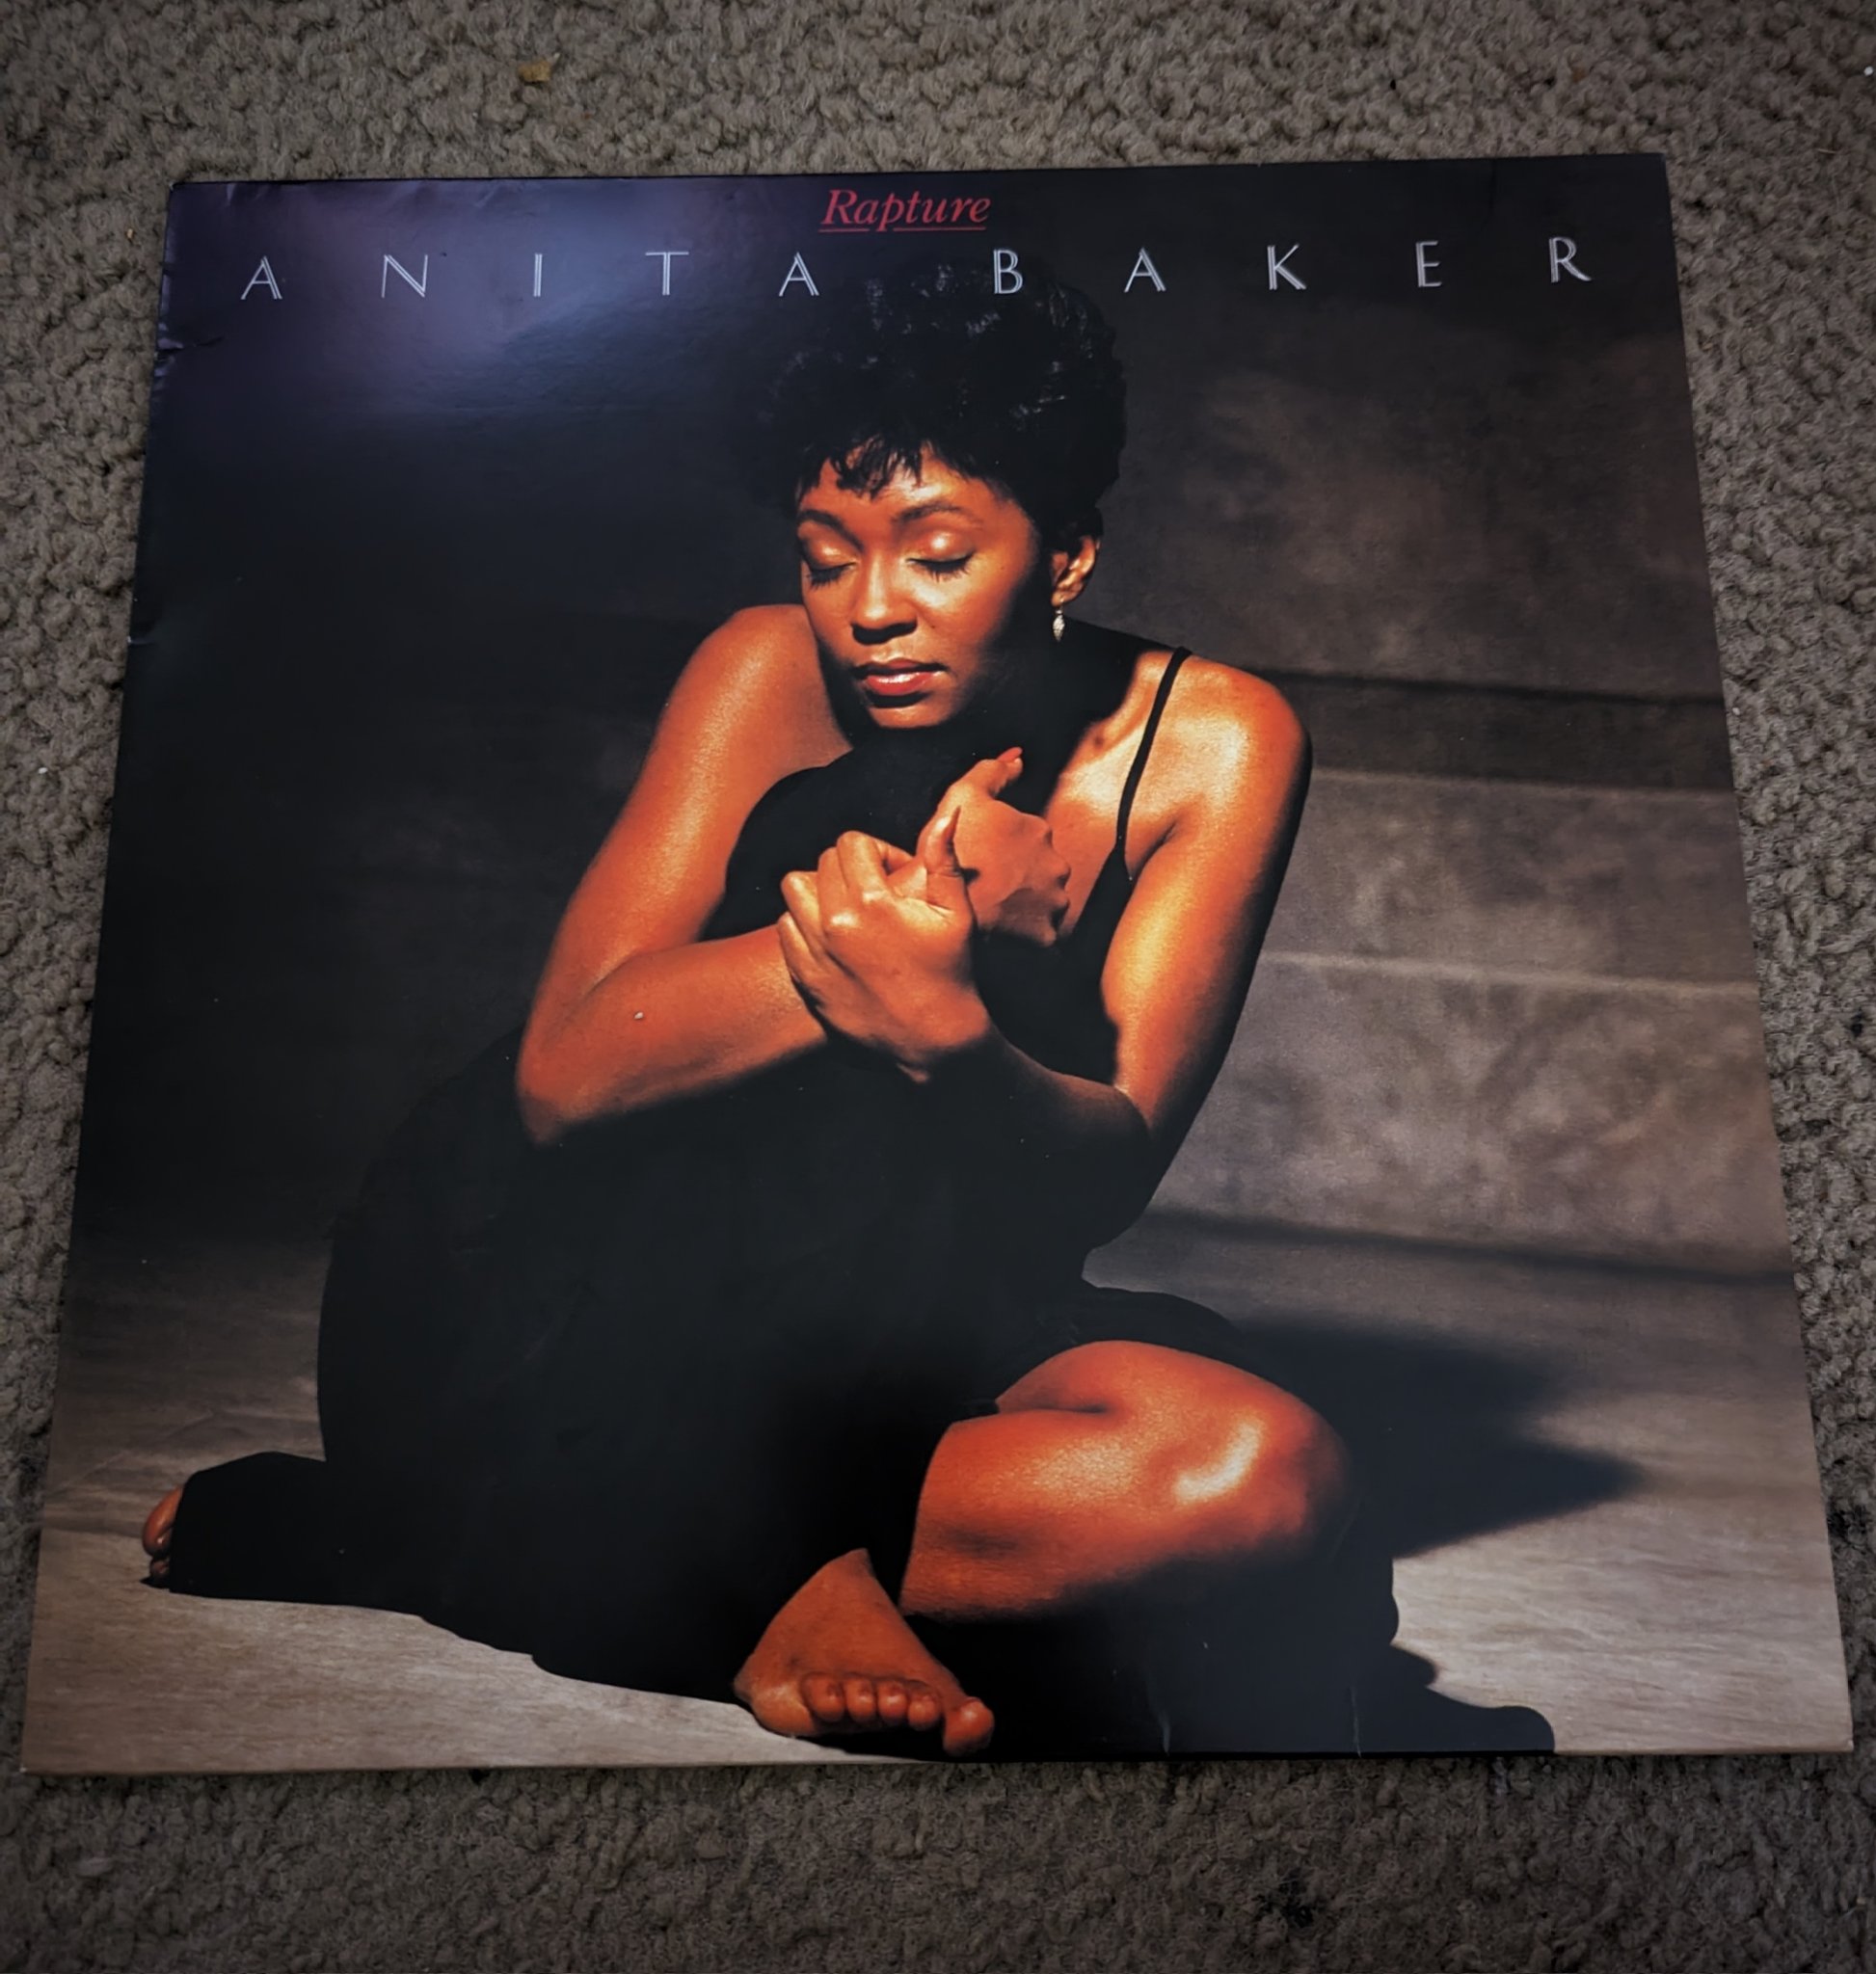 Breaking out the on this Throwback Thursday.

Happy Birthday, Anita Baker. 